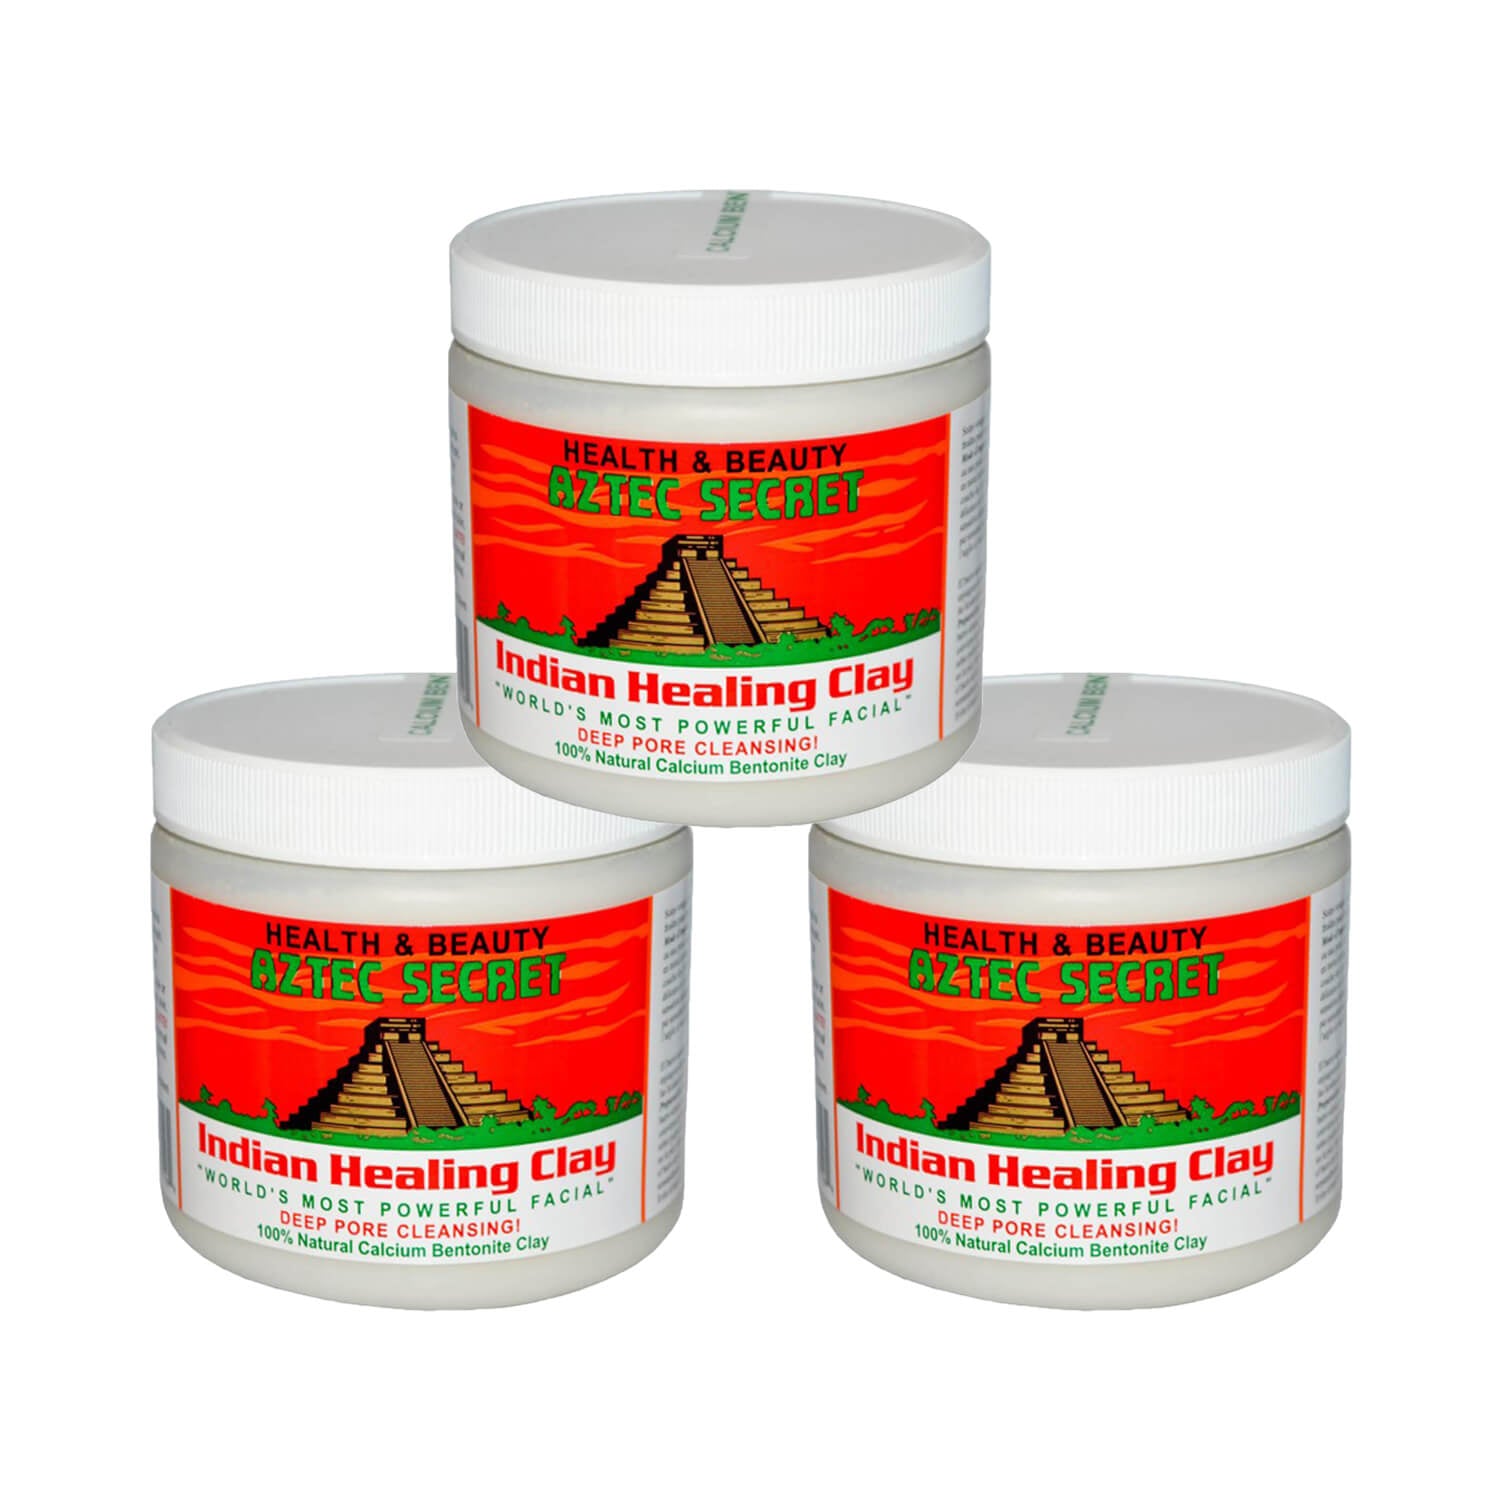 Aztec Secret Indian Healing Clay Deep Pore Cleansing Pack of 3